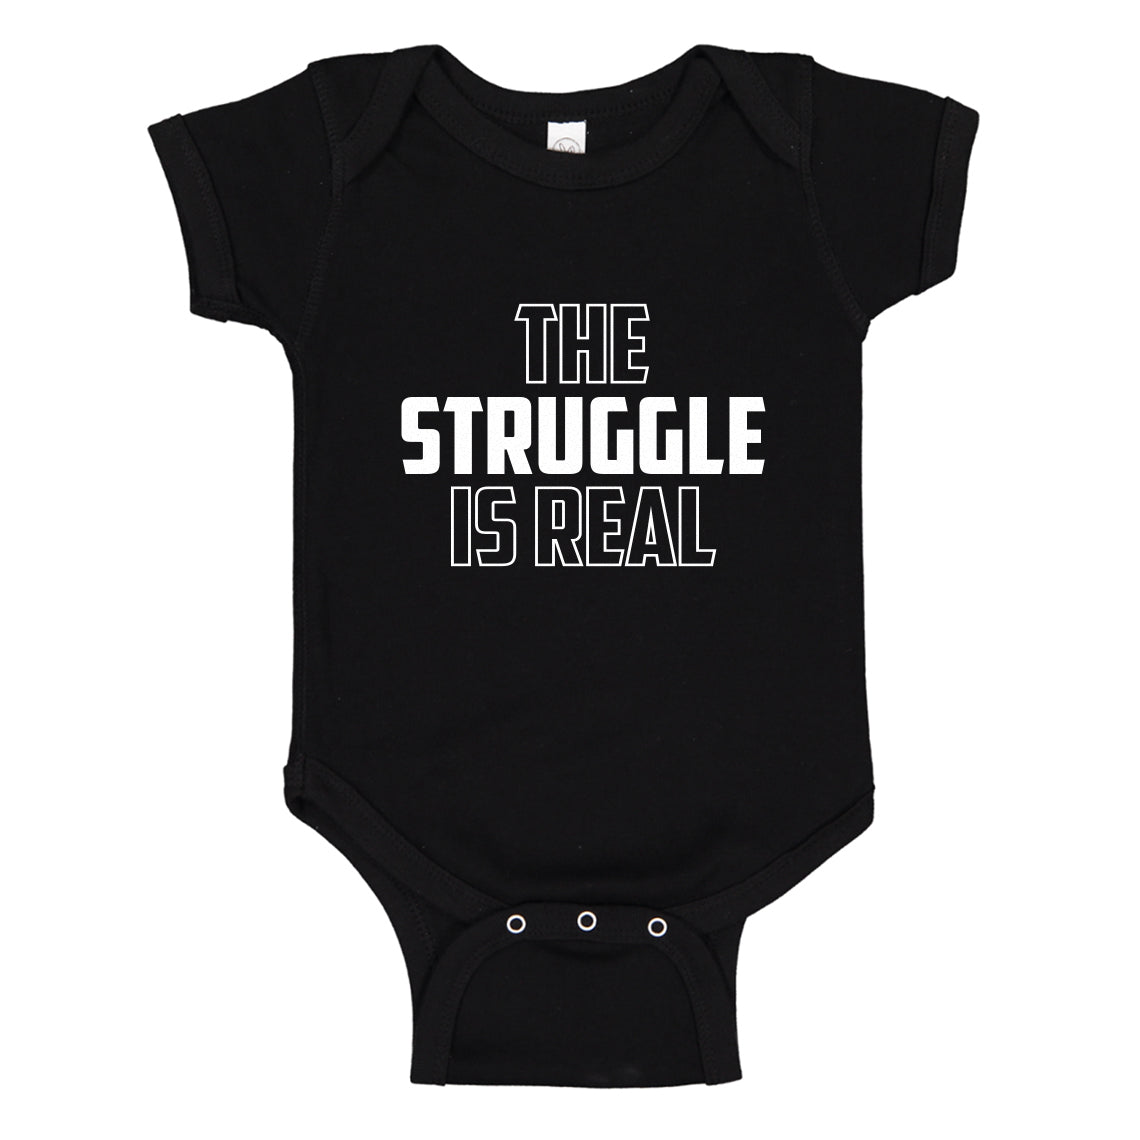 Baby Onesie The Struggle Is Real 100% Cotton Infant Bodysuit